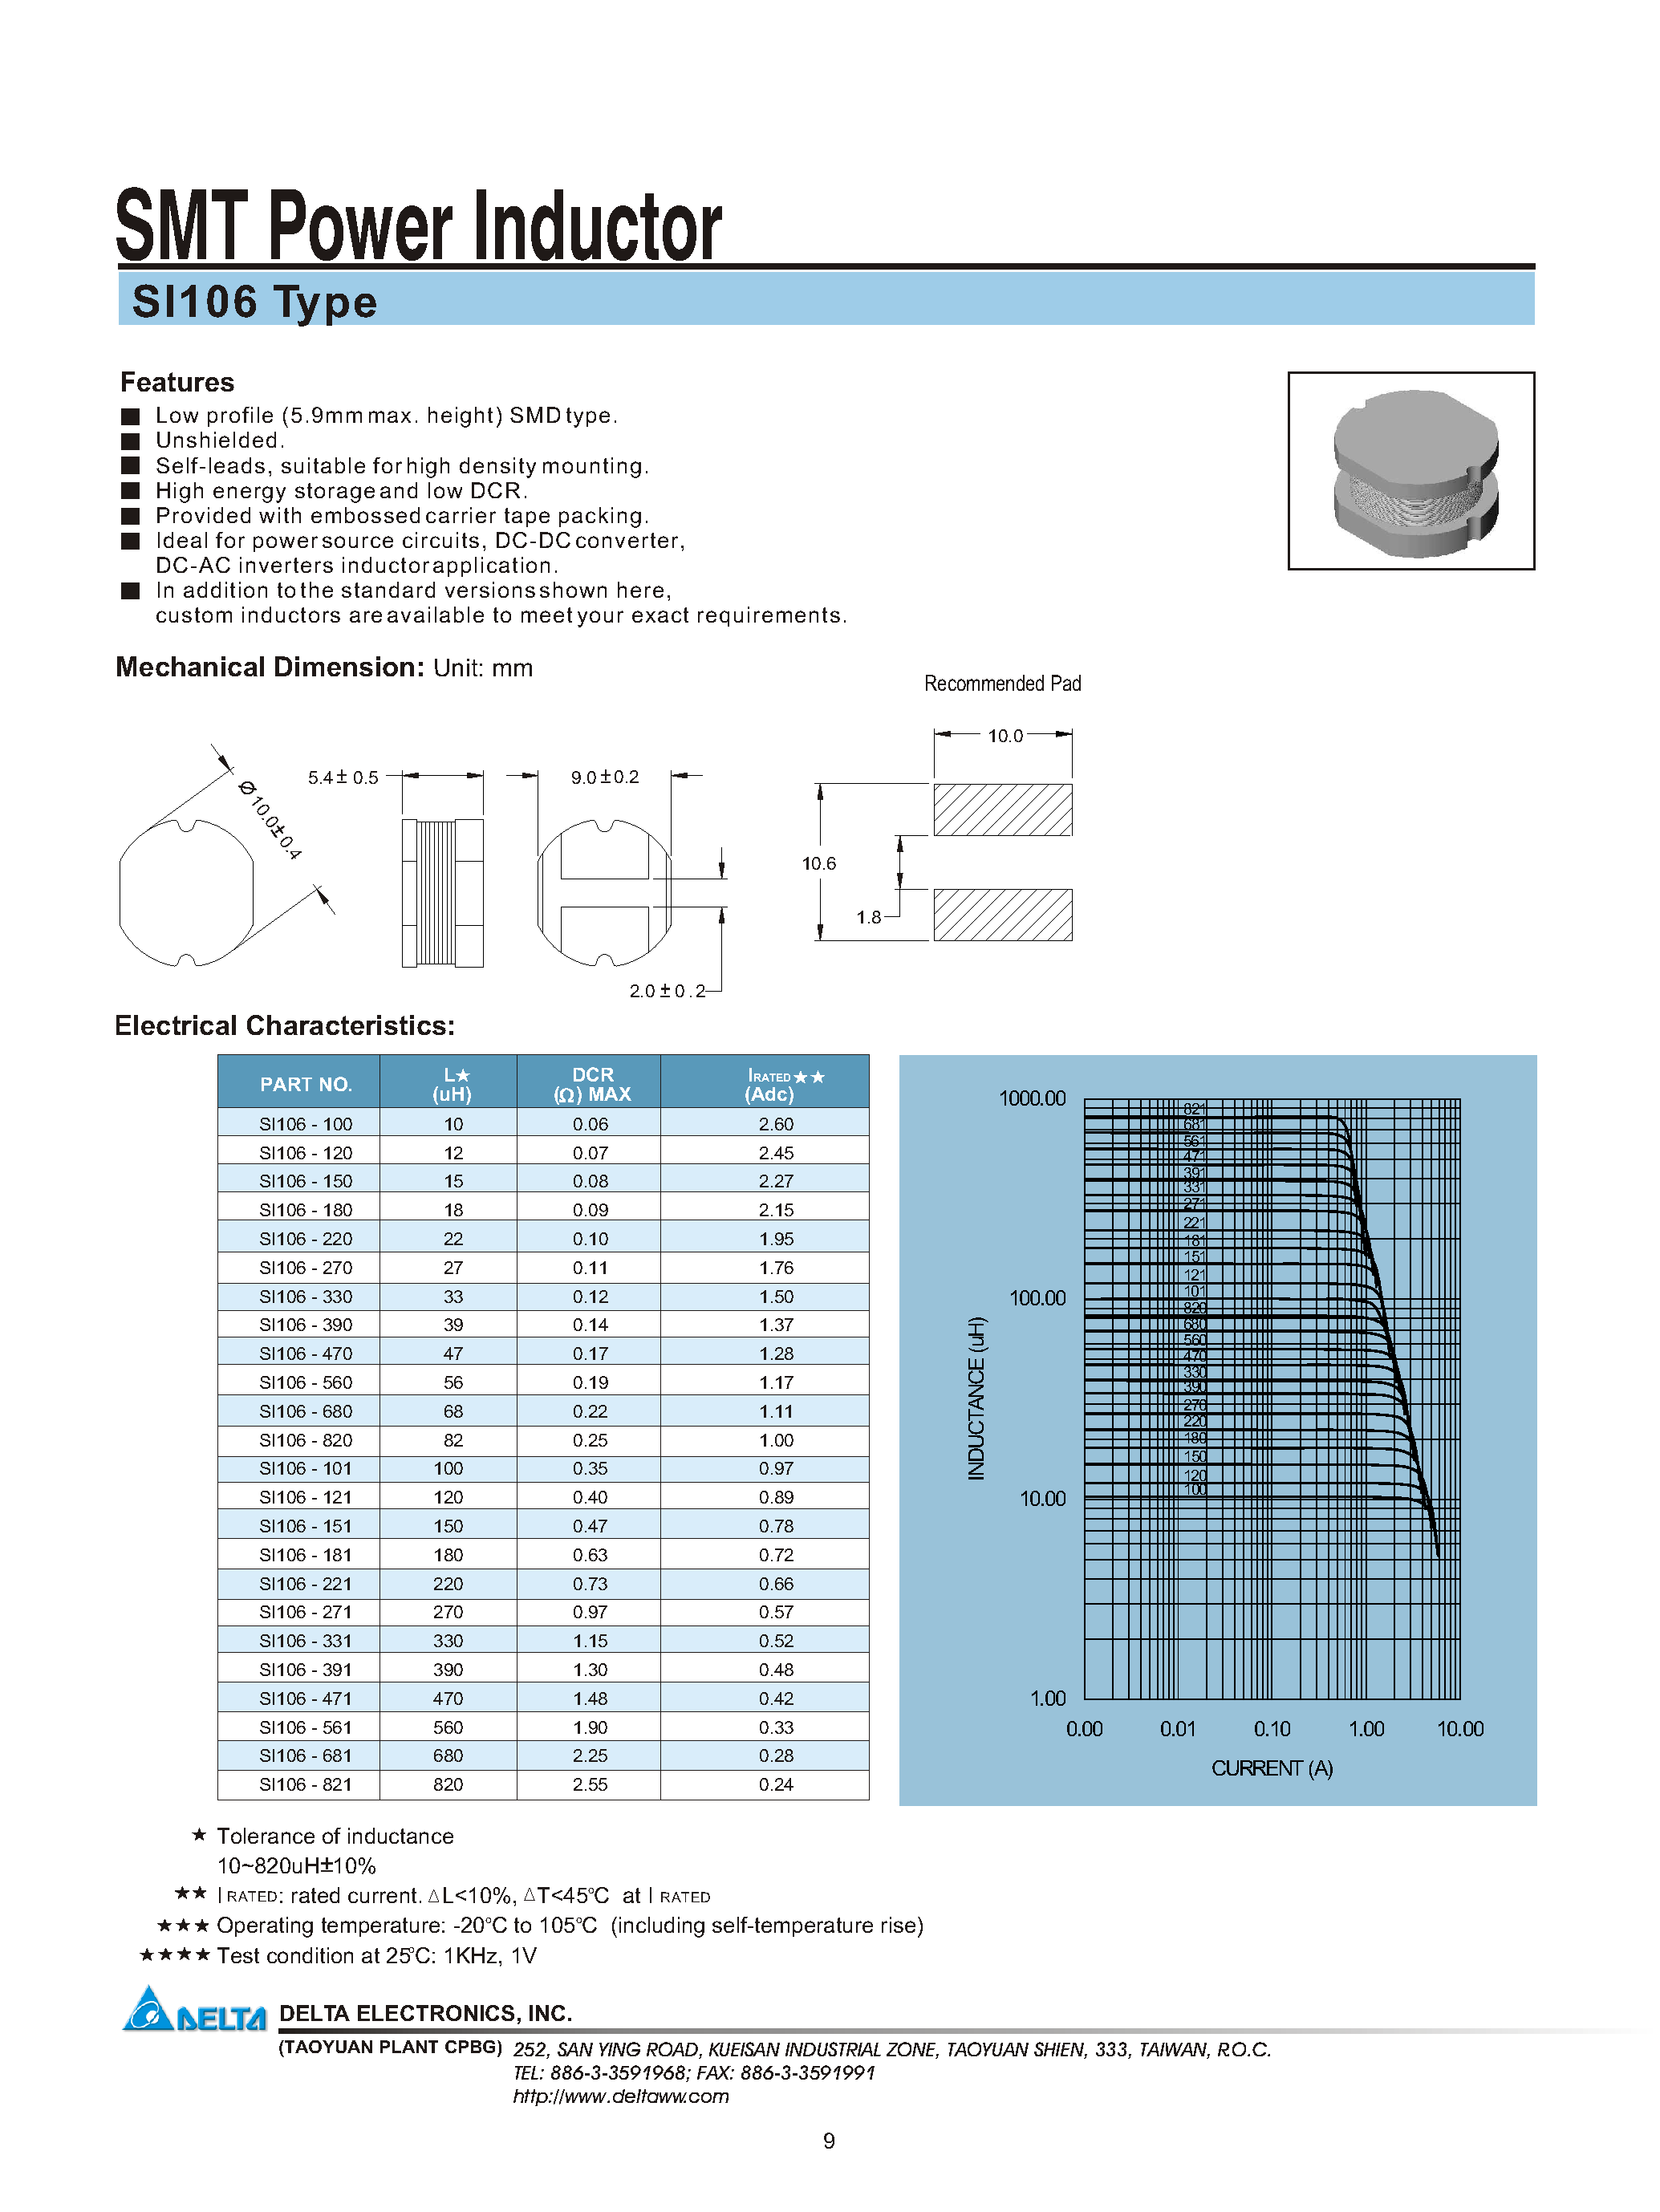 Datasheet SI106-101 - SMT Power Inductor page 1